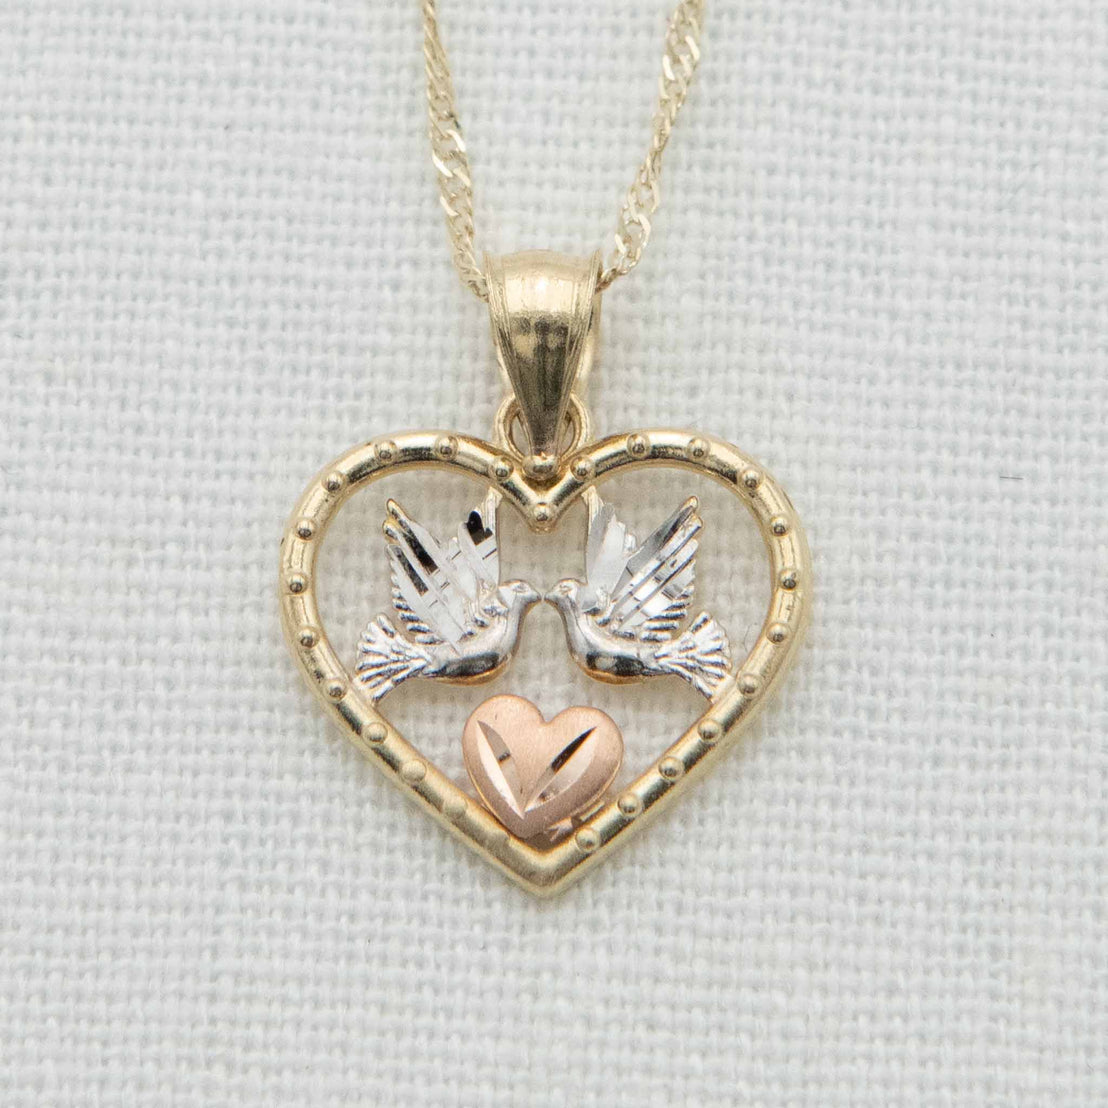 Gold heart with white gold doves and rose gold heart detail on chain